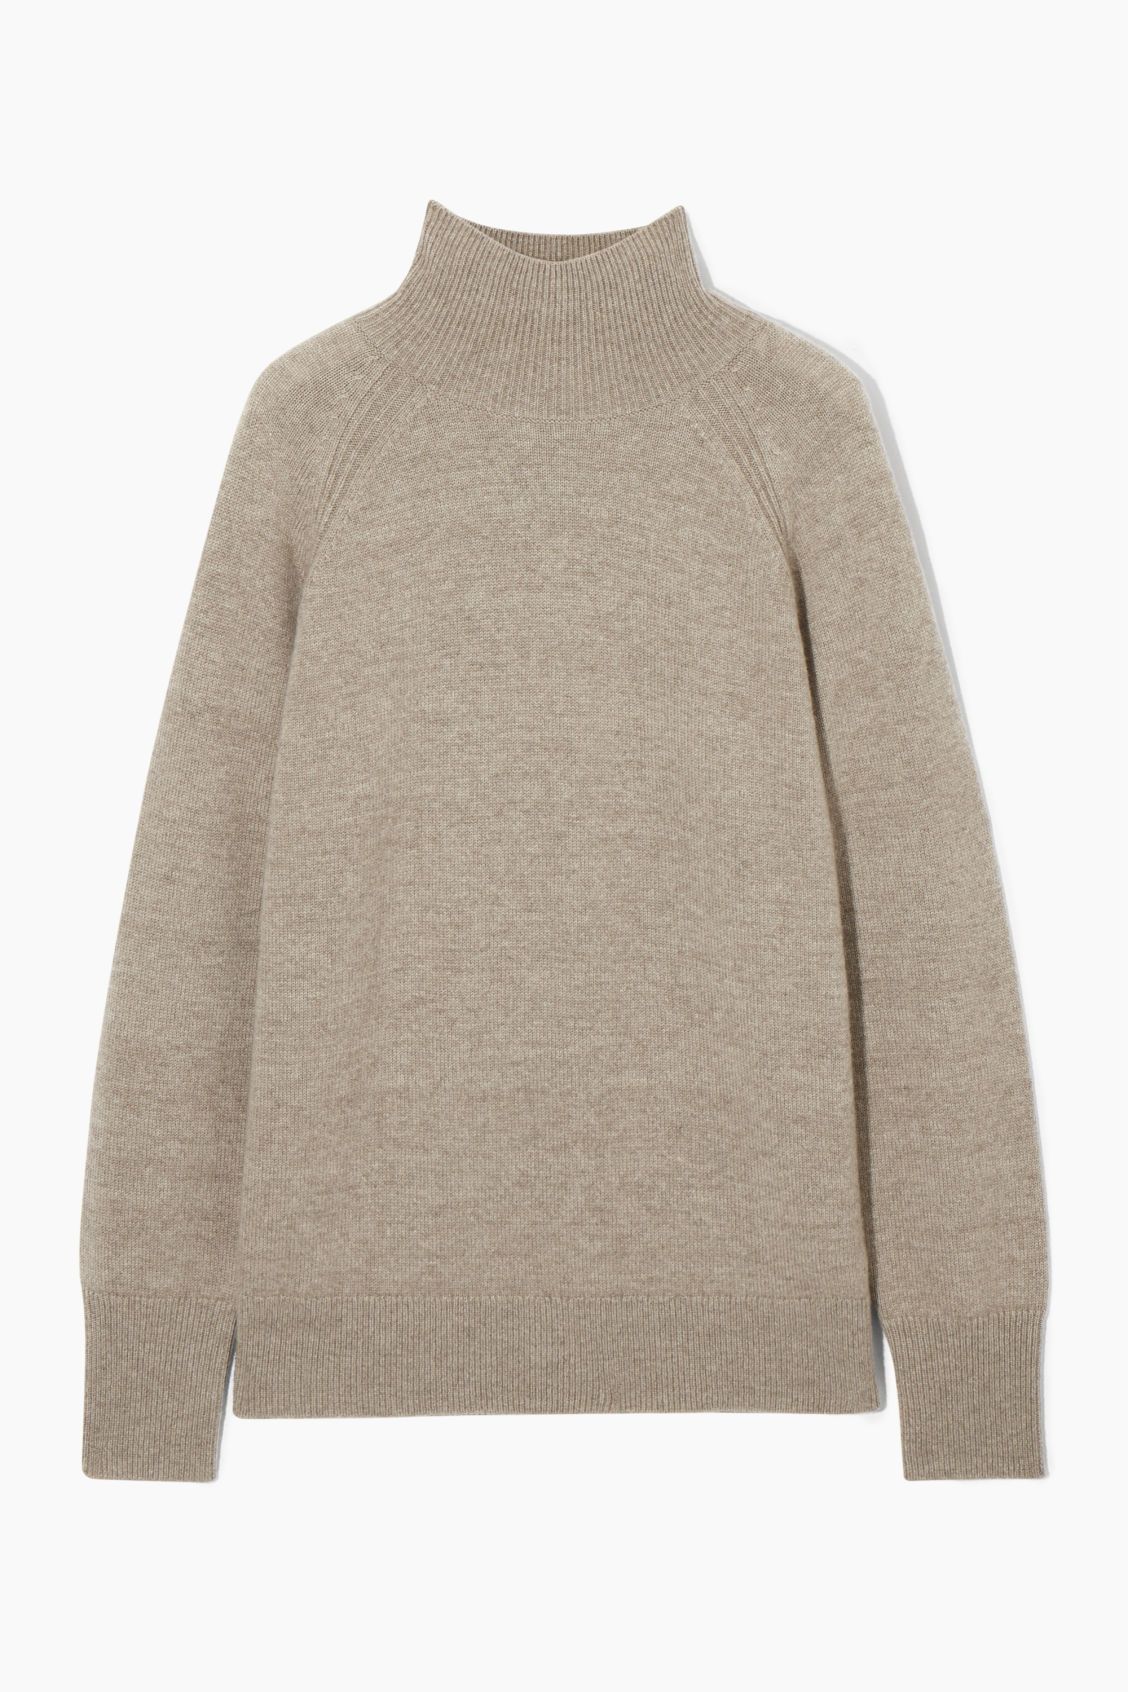 PURE CASHMERE TURTLENECK SWEATER - UNDYED / NATURAL - Knitwear - COS | COS (US)